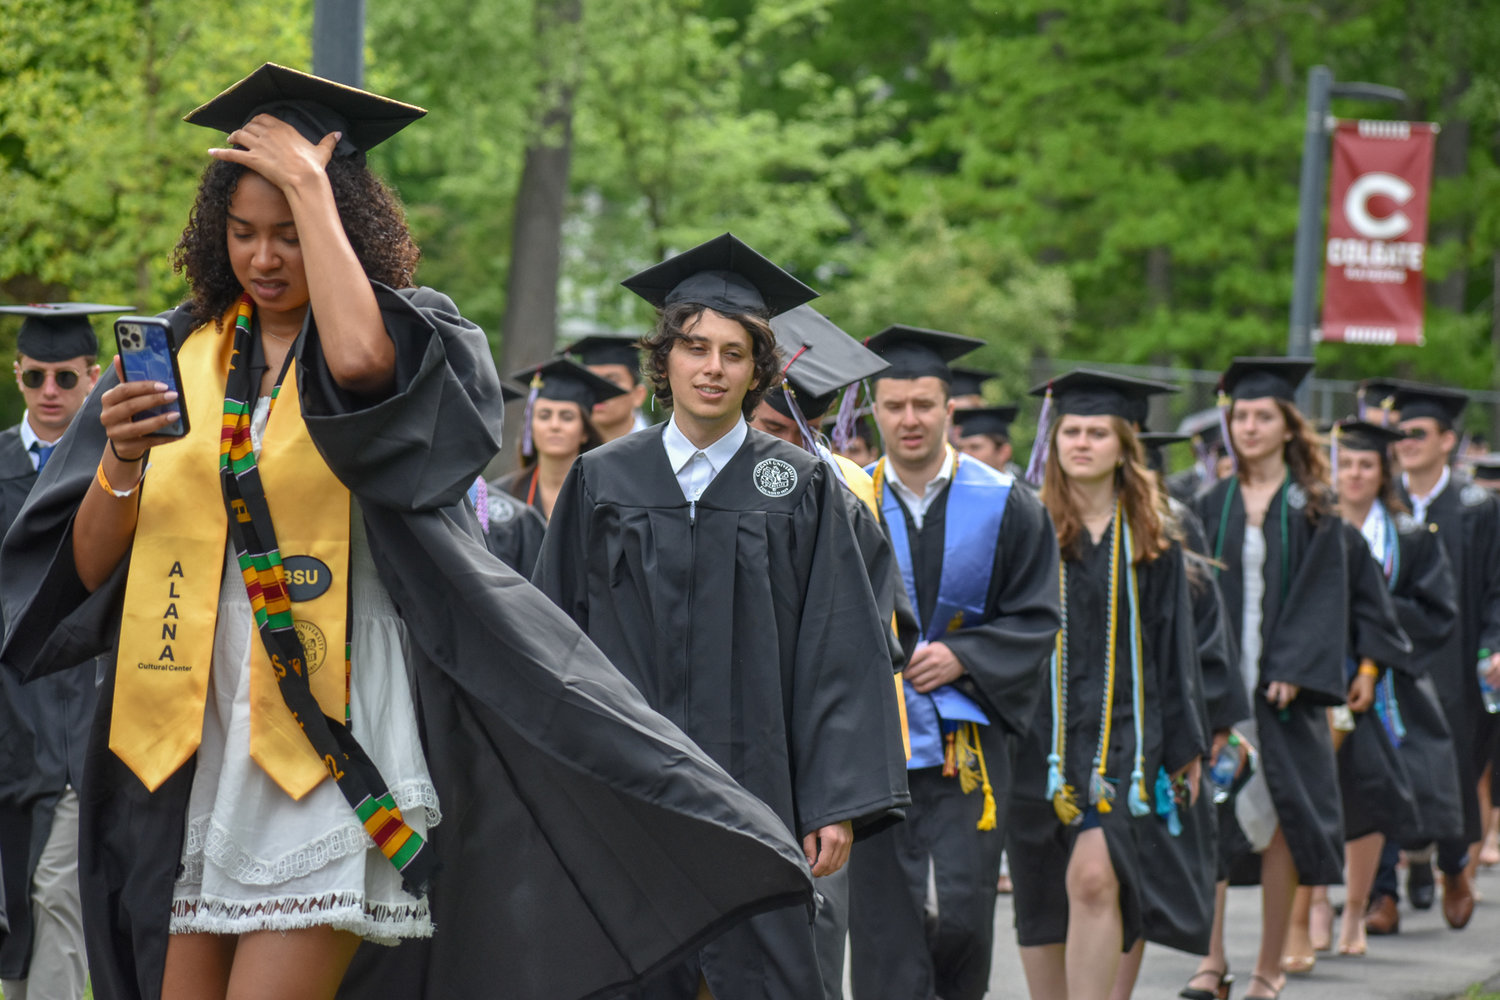 Nearly 700 students graduated during Colgate's 201st Commencement Ceremony on Sunday, May 22, 2022 at the Sanford Field House.